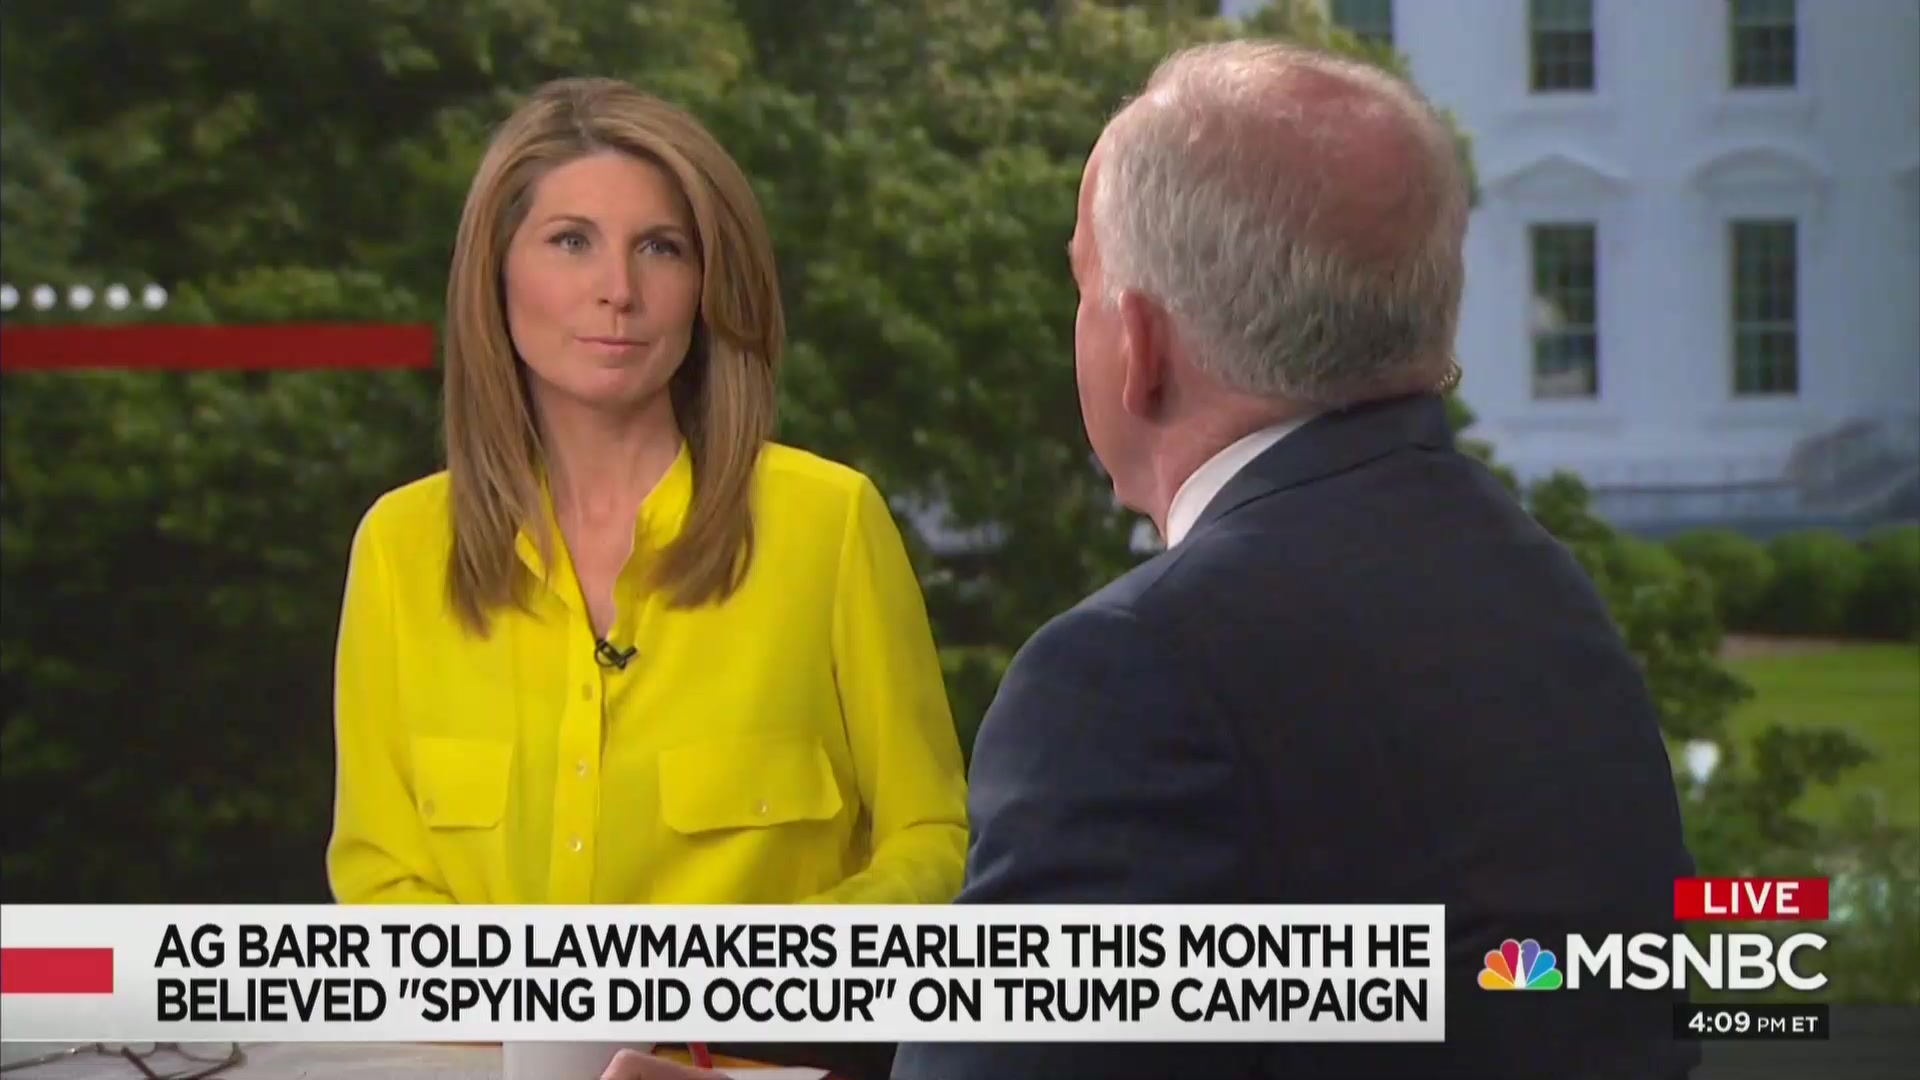 MSNBC’s Nicolle Wallace: Does Barr Accusing FBI of ‘Spying’ Signal ‘He’s Watched Too Much Sean Hannity’?